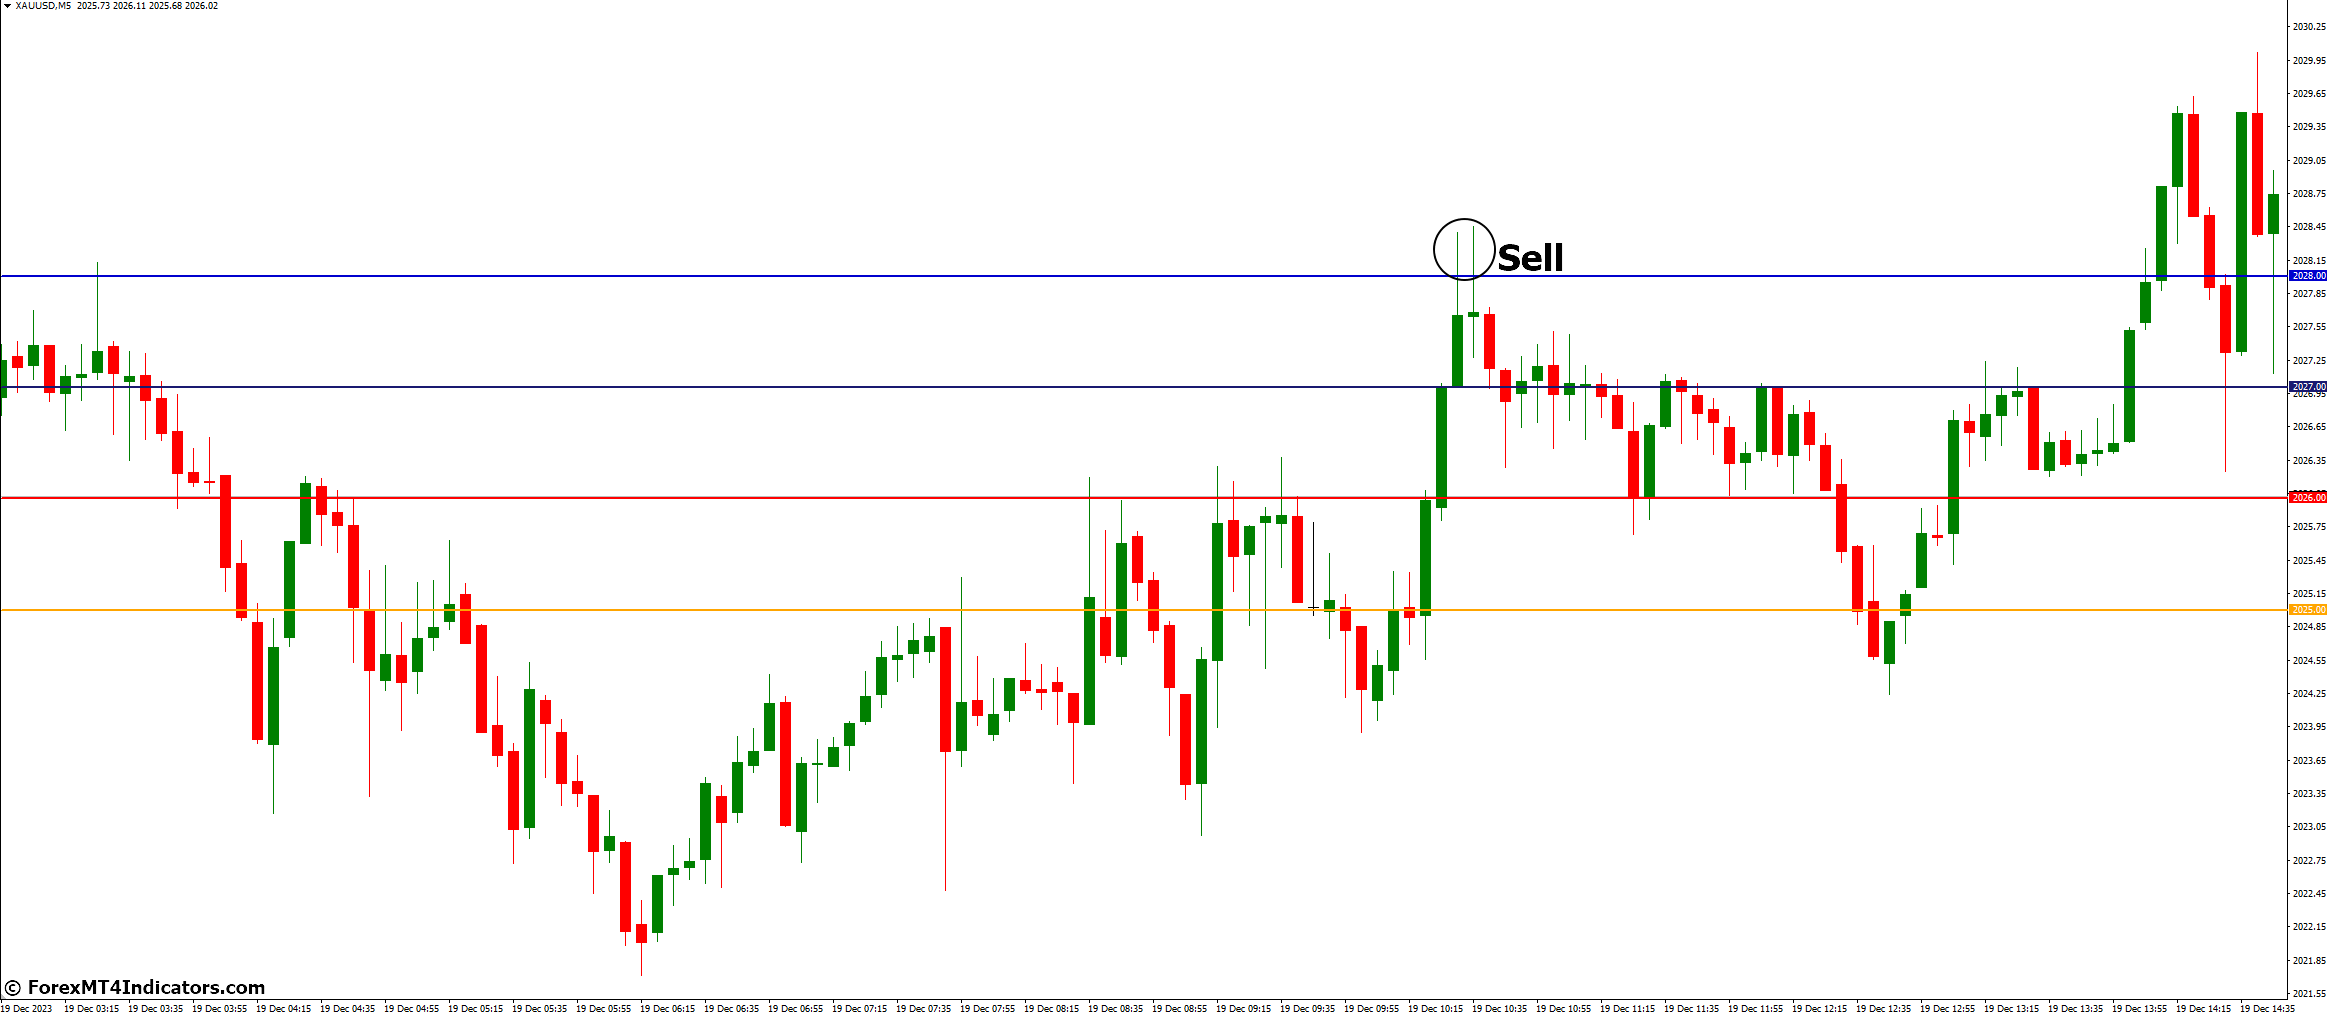 How to Trade with Round Levels Indicator - Sell Entry